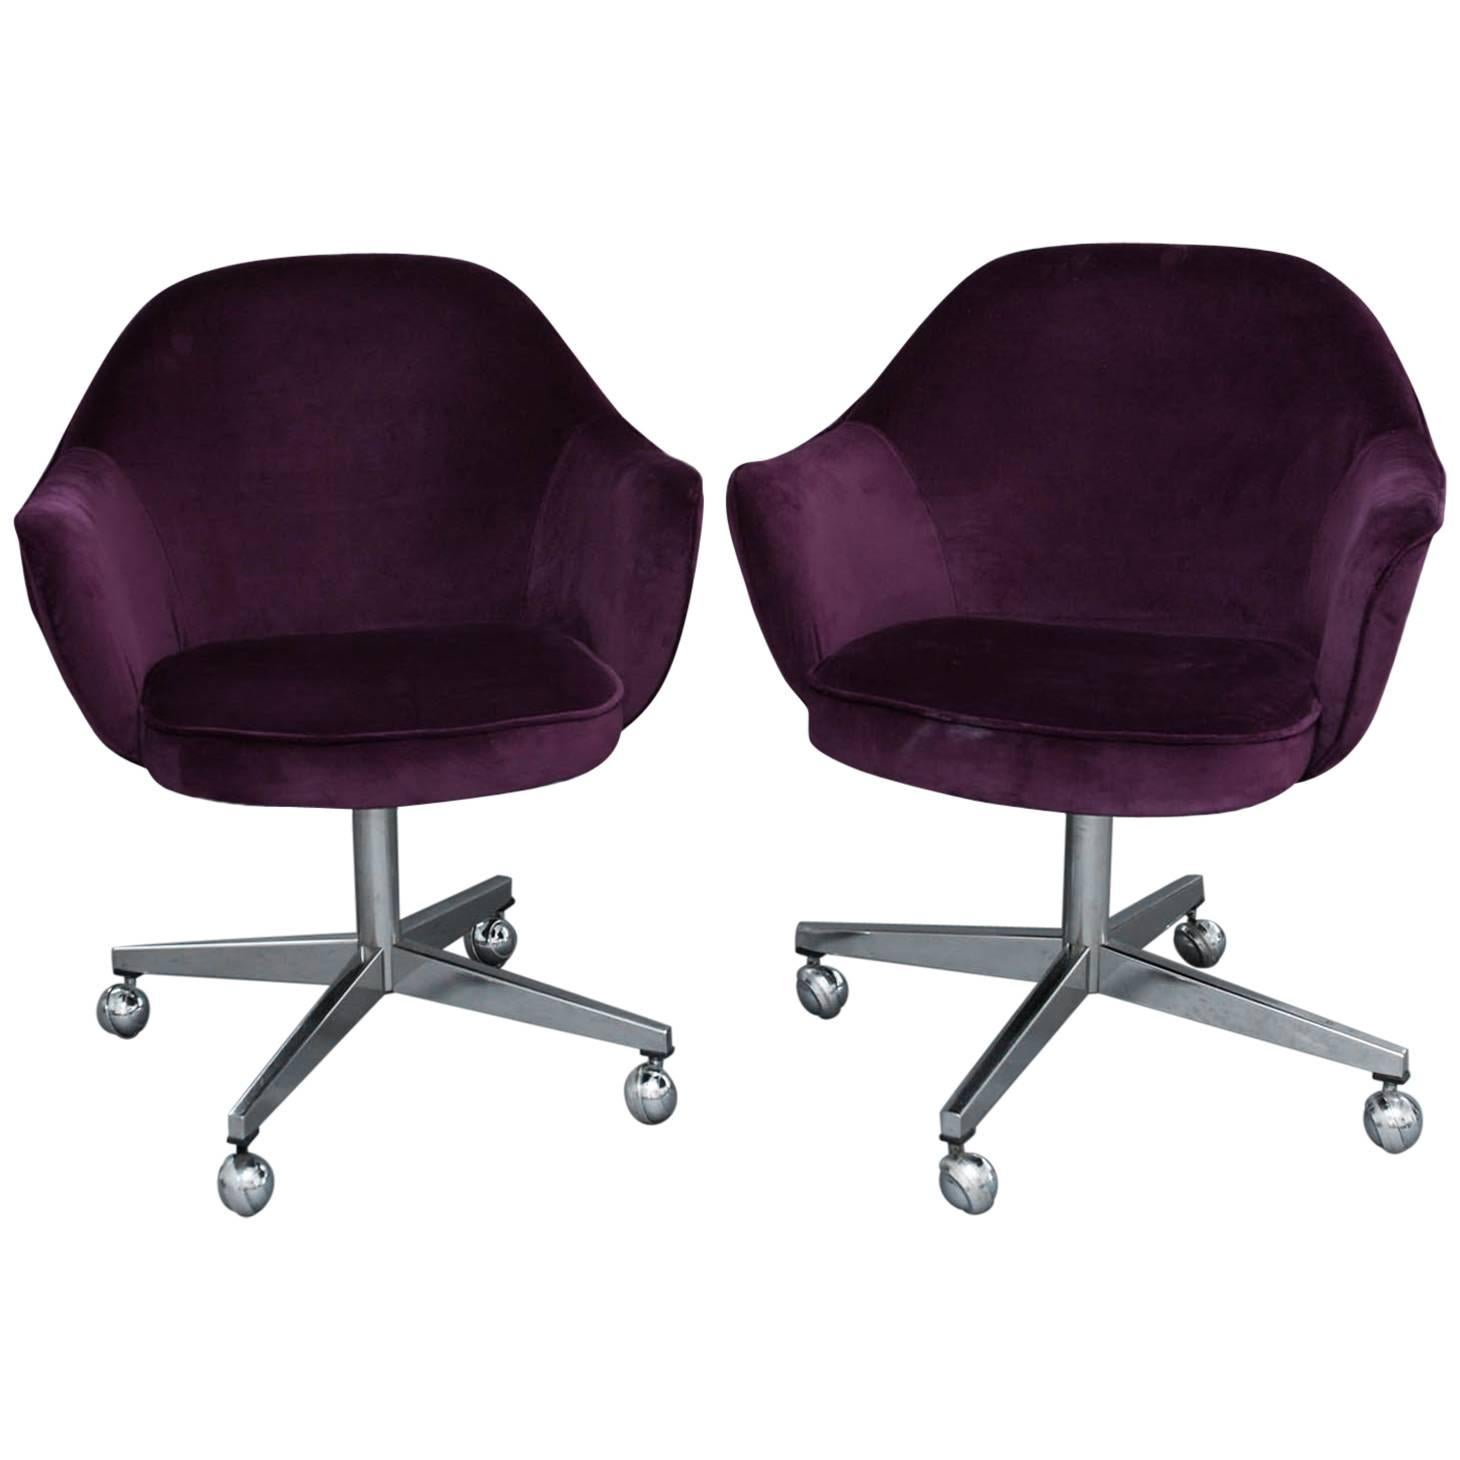 Pair of Saarinen for Knoll Executive Swivel Chairs